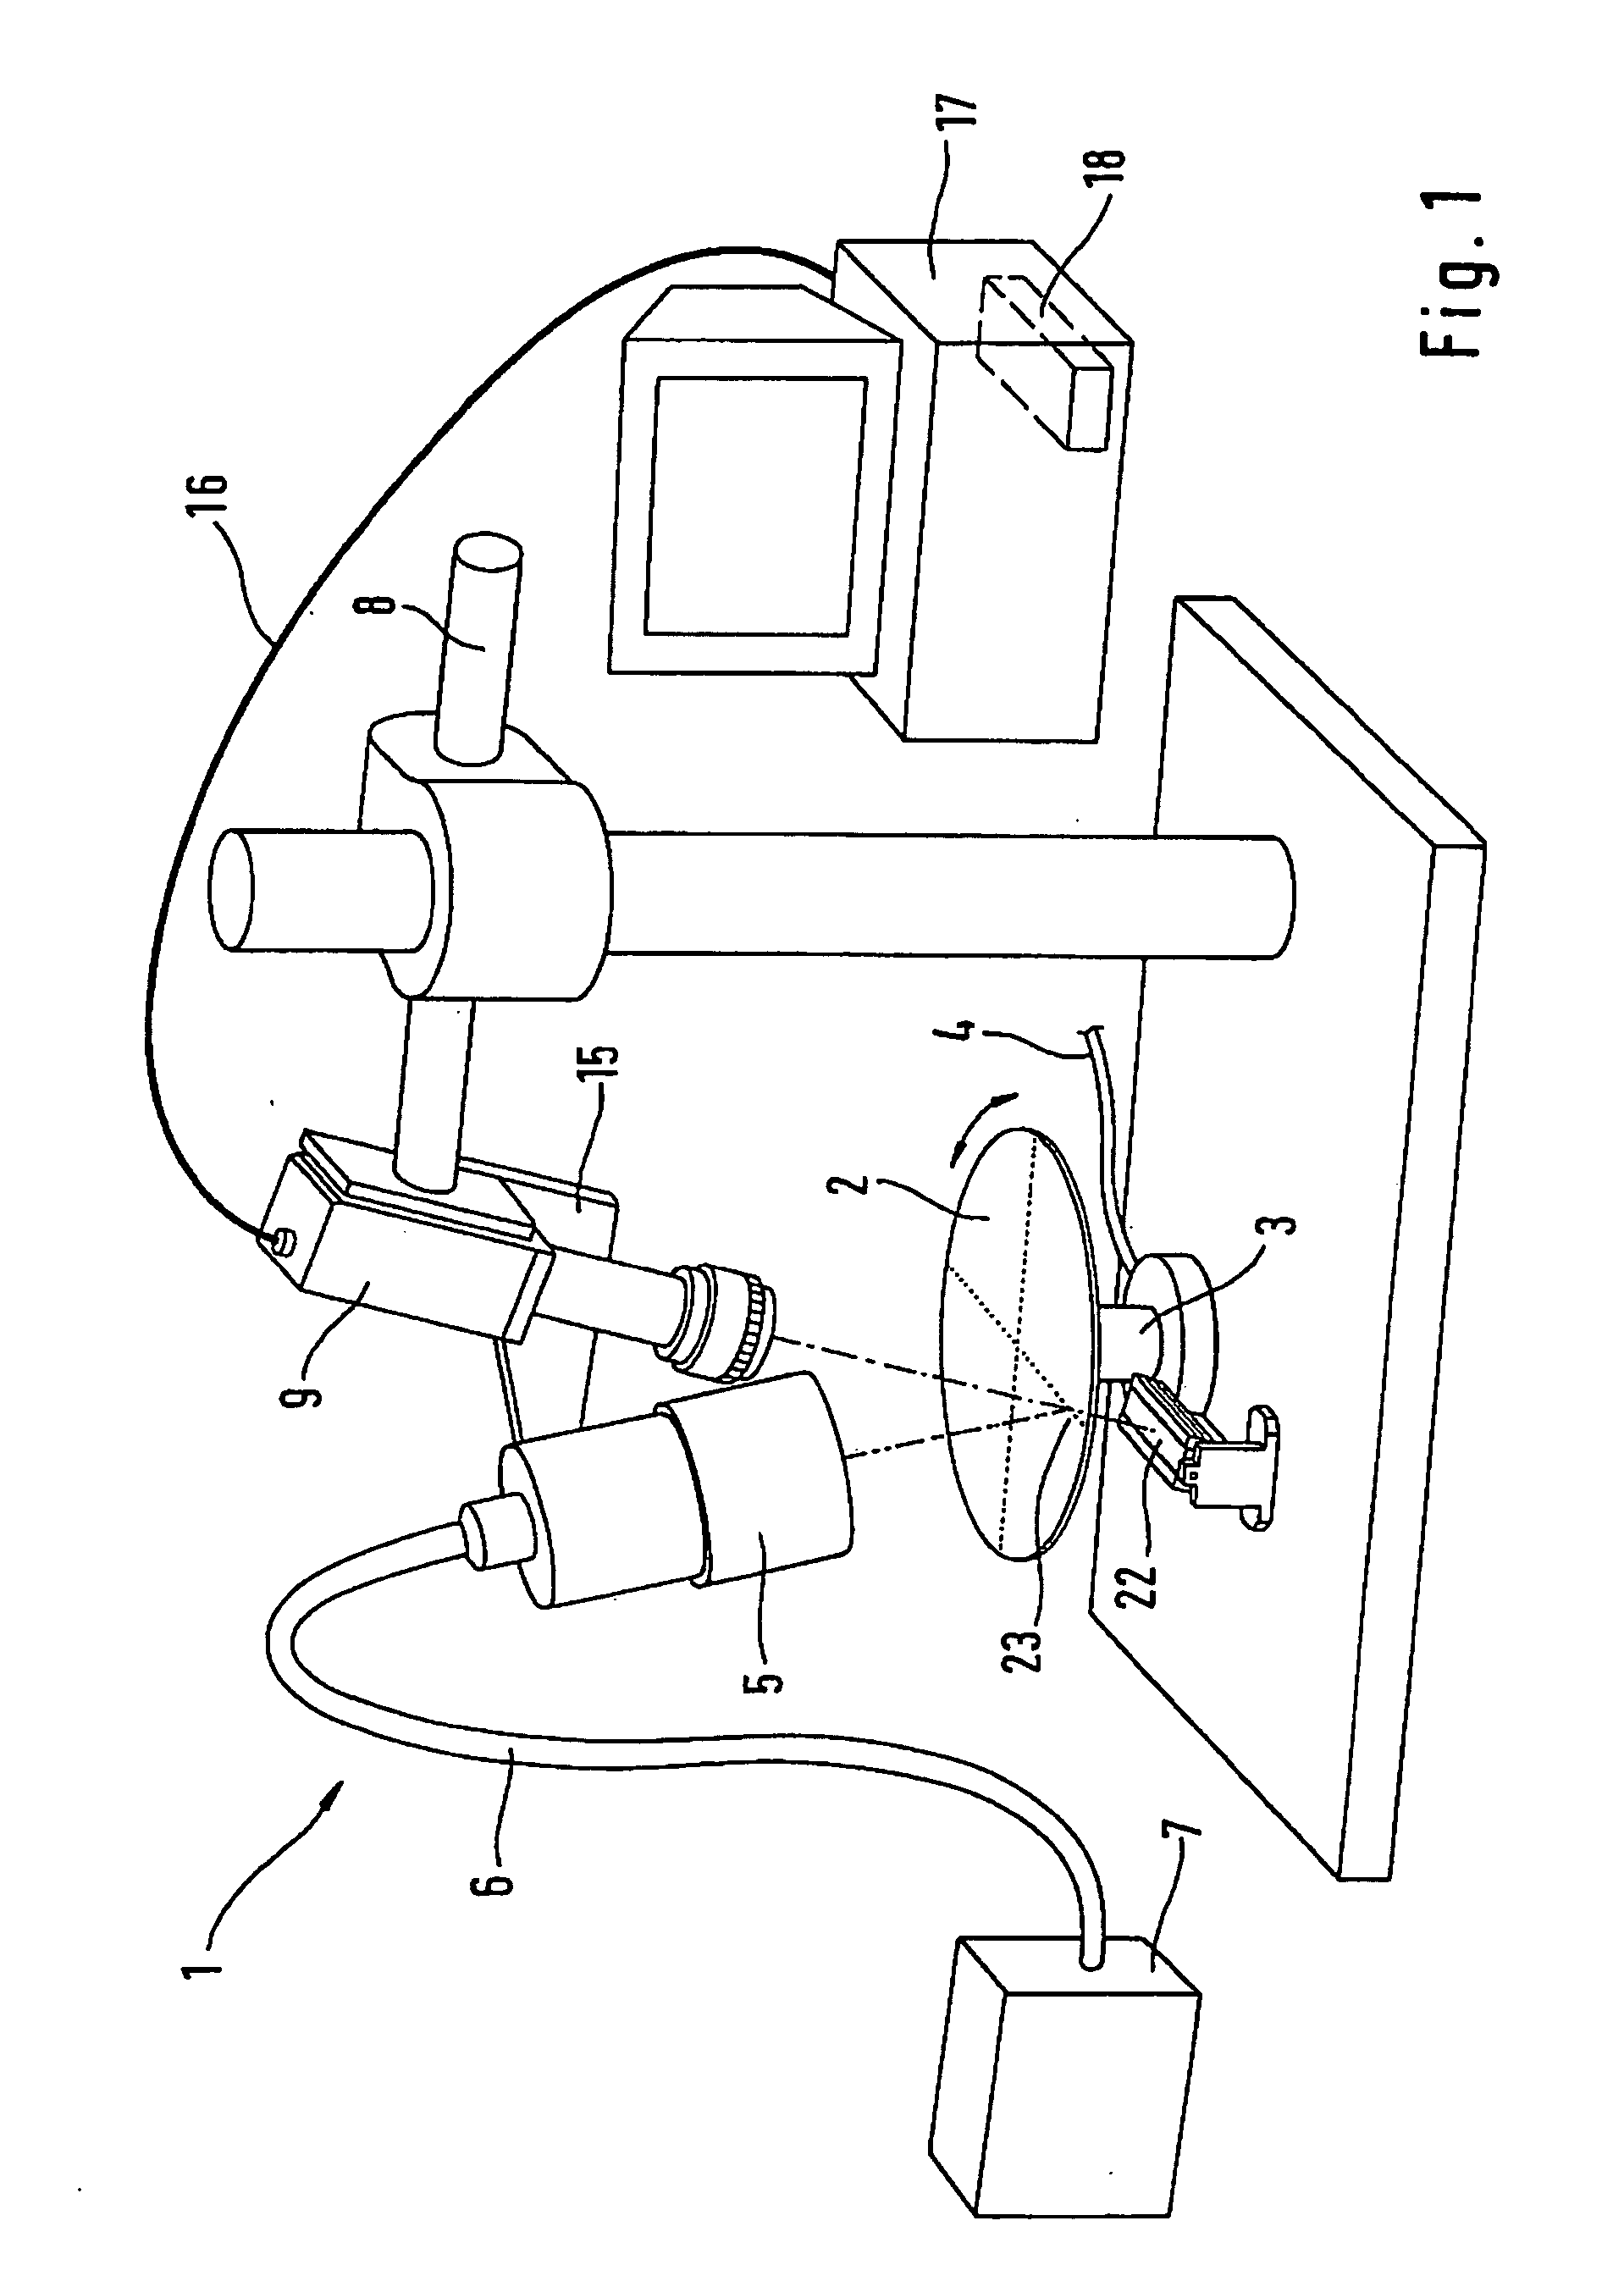 Method and system for inspecting a wafer